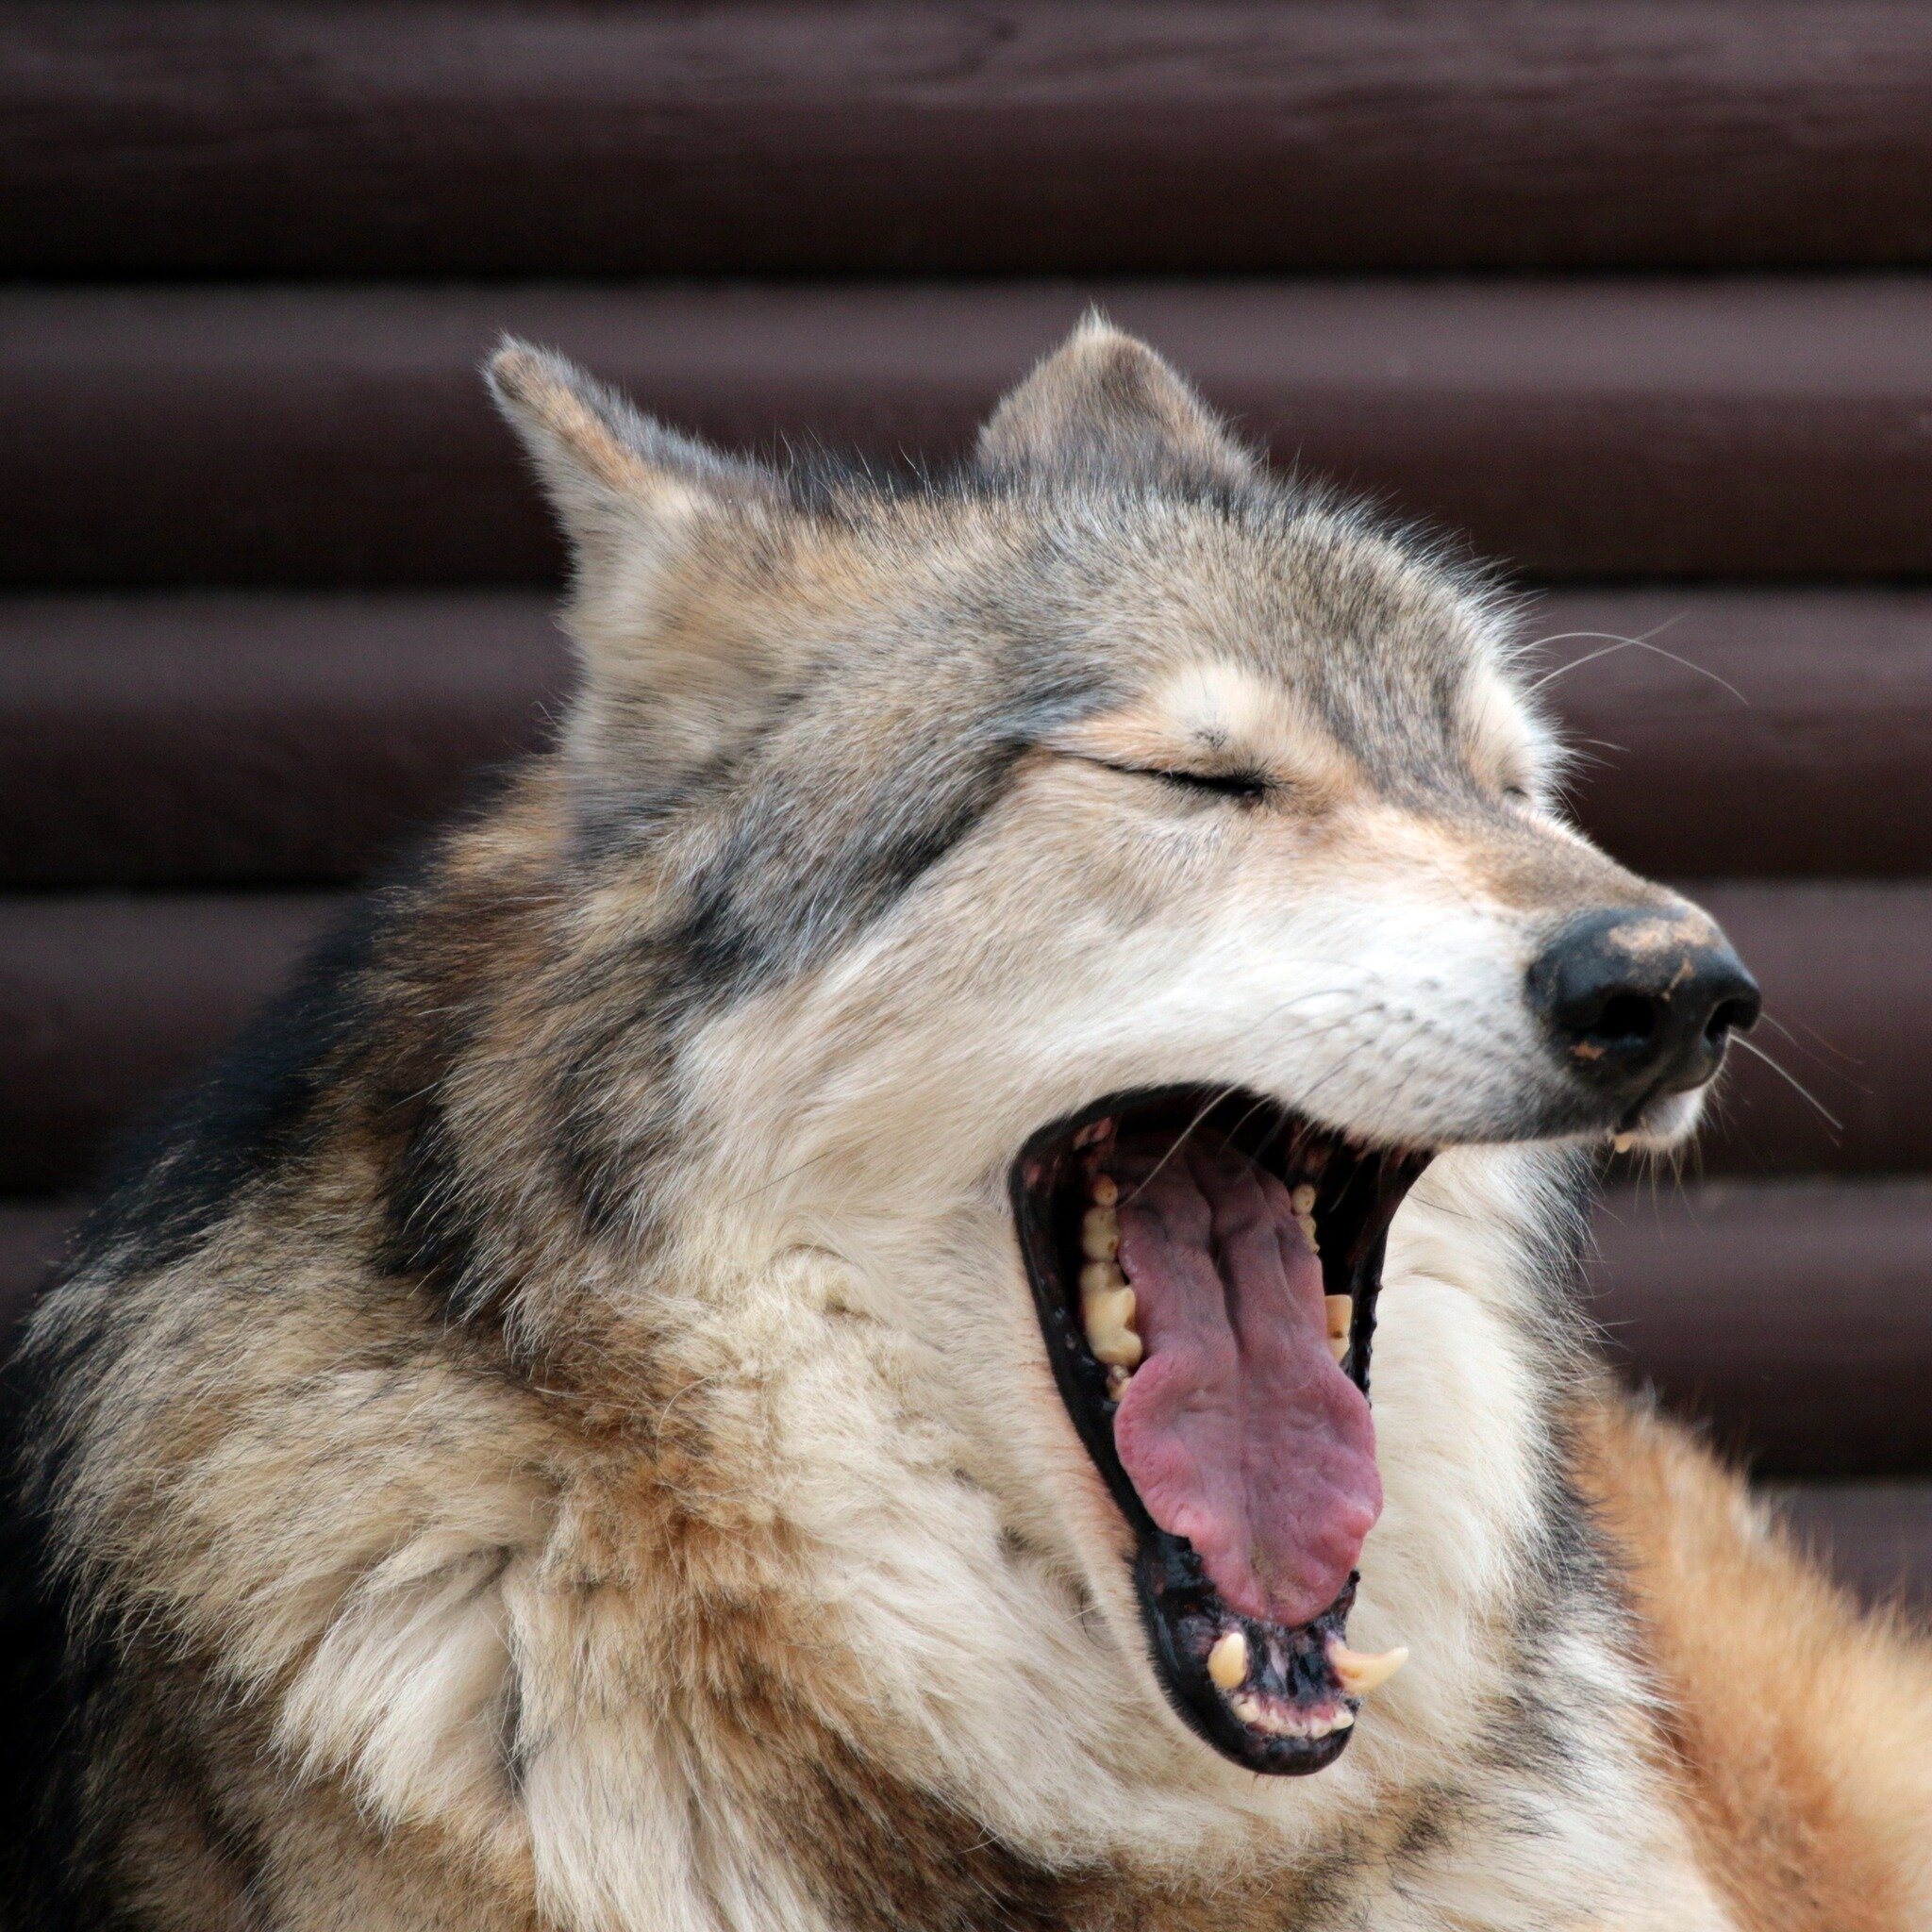 Wolfy Joke of the Day! 
How do you make a wolf laugh?
Give him a funny bone! 

Do you have a joke that could make Rajah laugh this hard?

#wolf #wolfdog #jokes #funnyfriday #haha